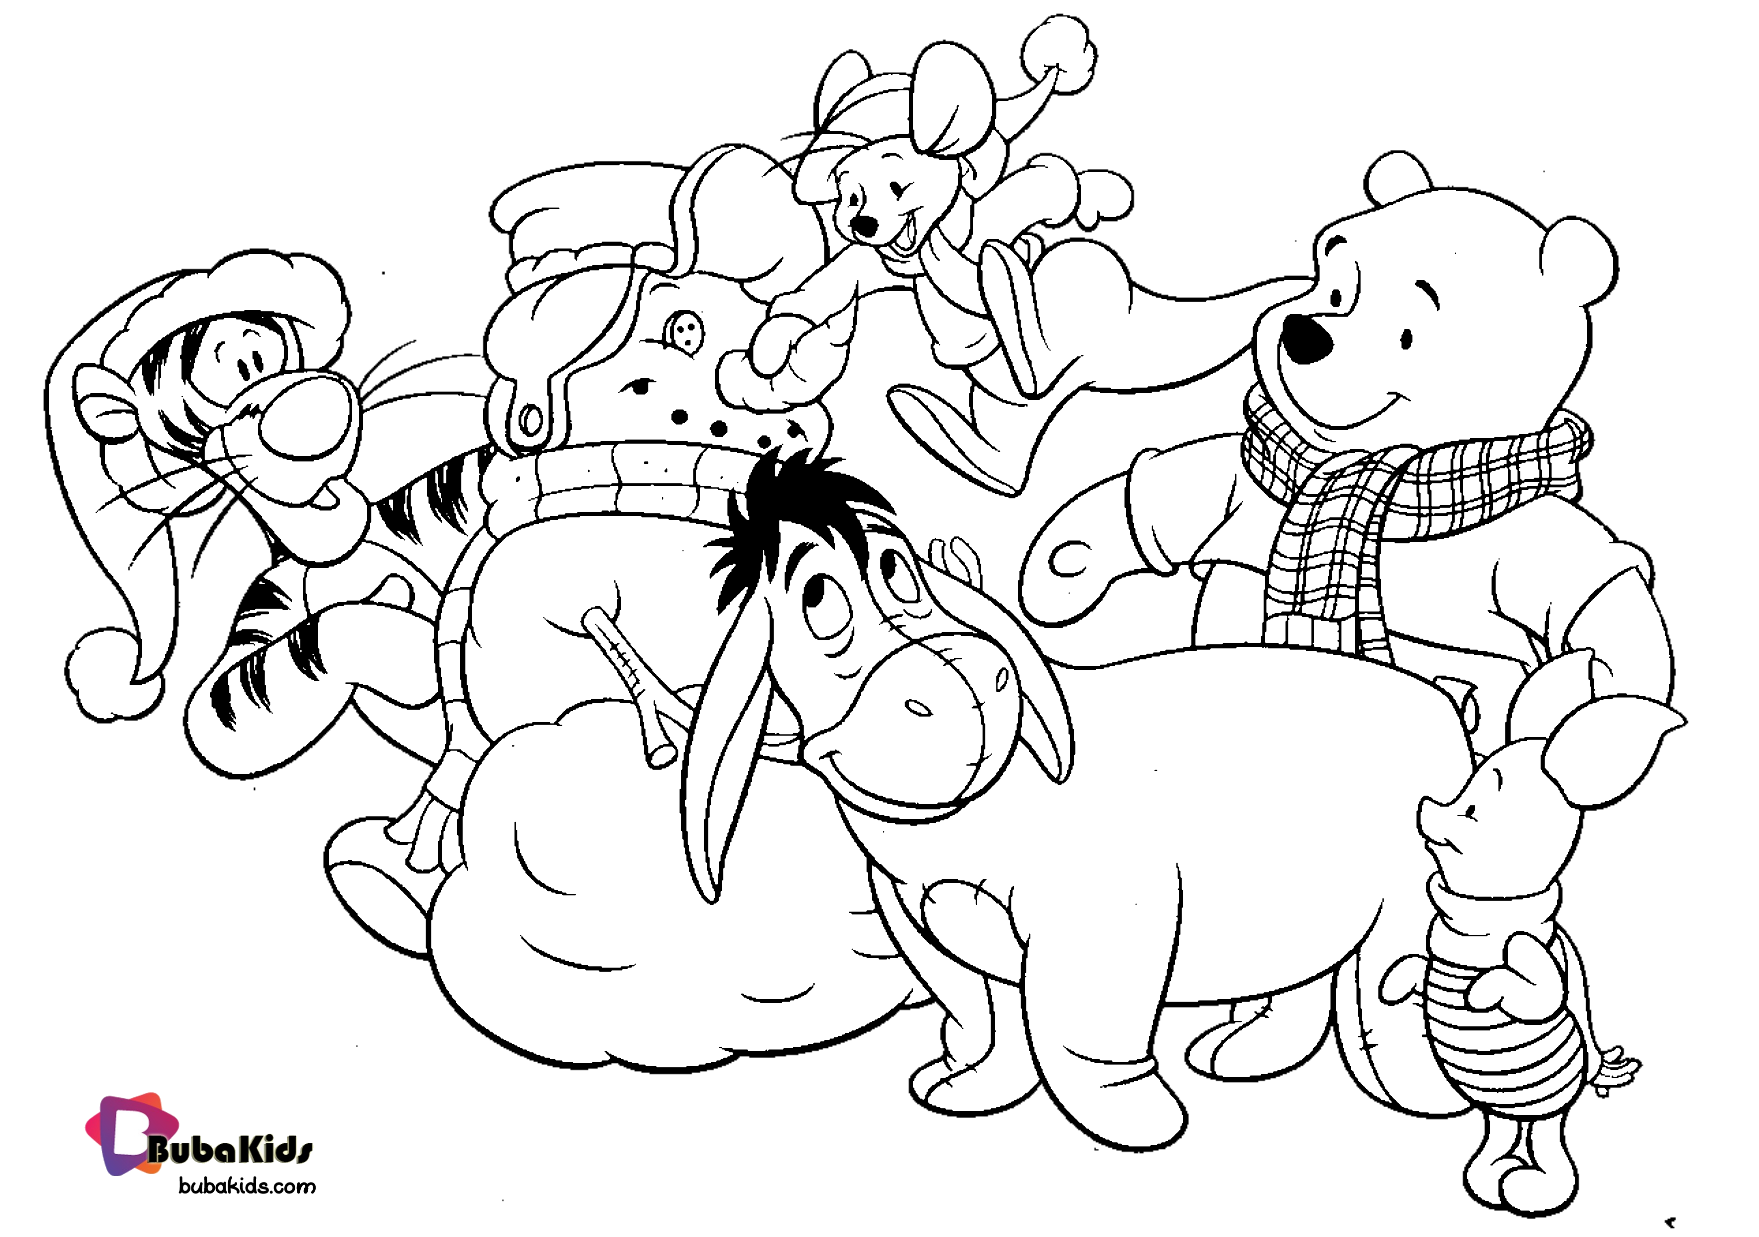 Pooh and friends christmas coloring page. Wallpaper